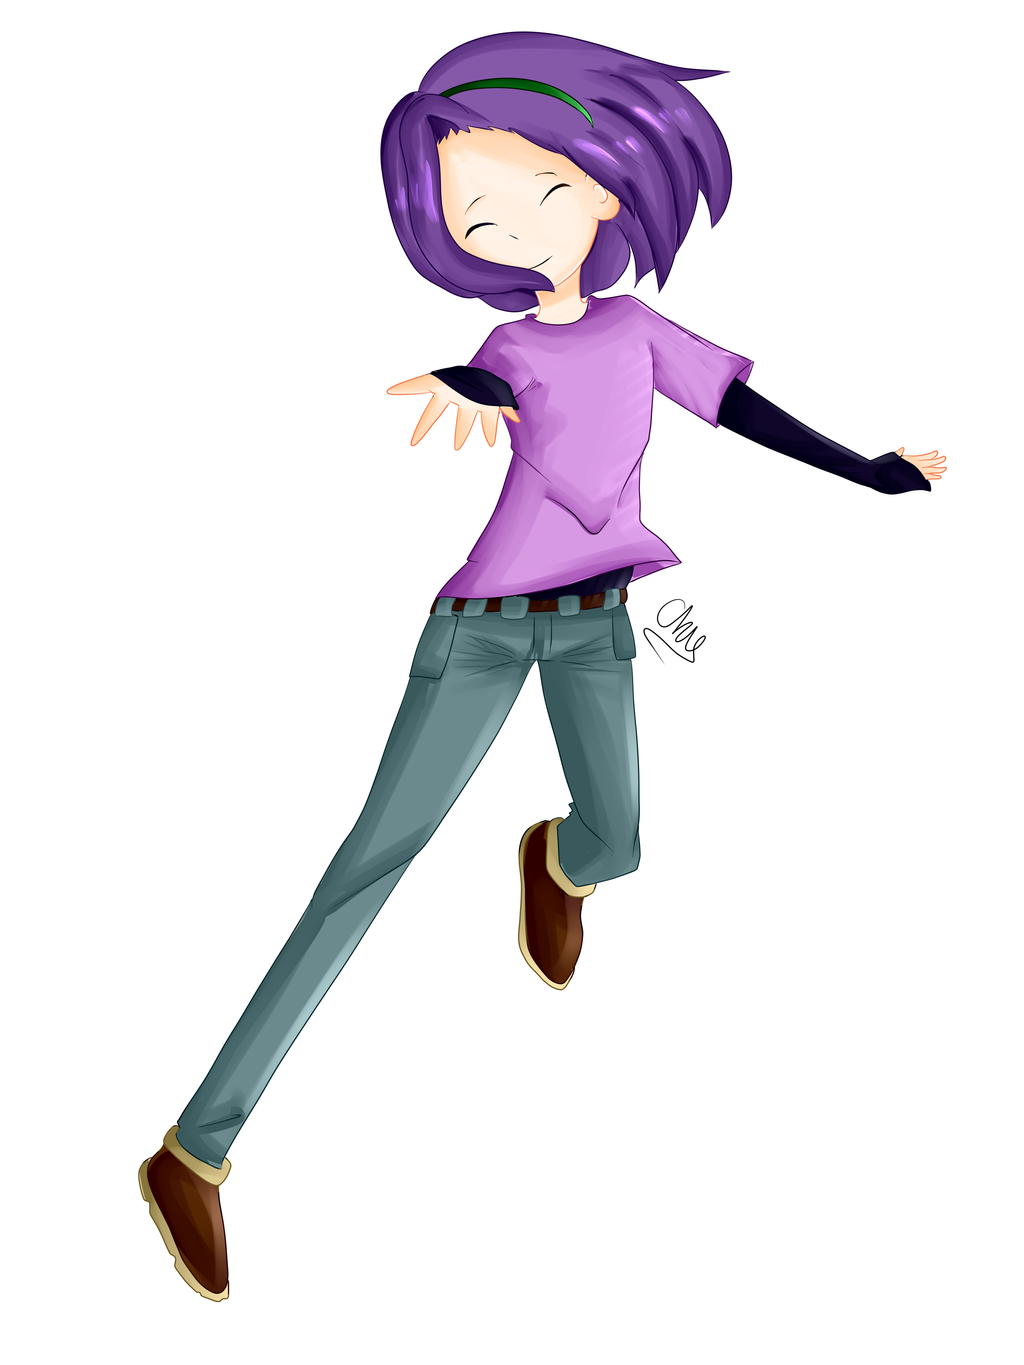 Bonnie FNAFHS Backgroundless By ChietheDemon On DeviantArt